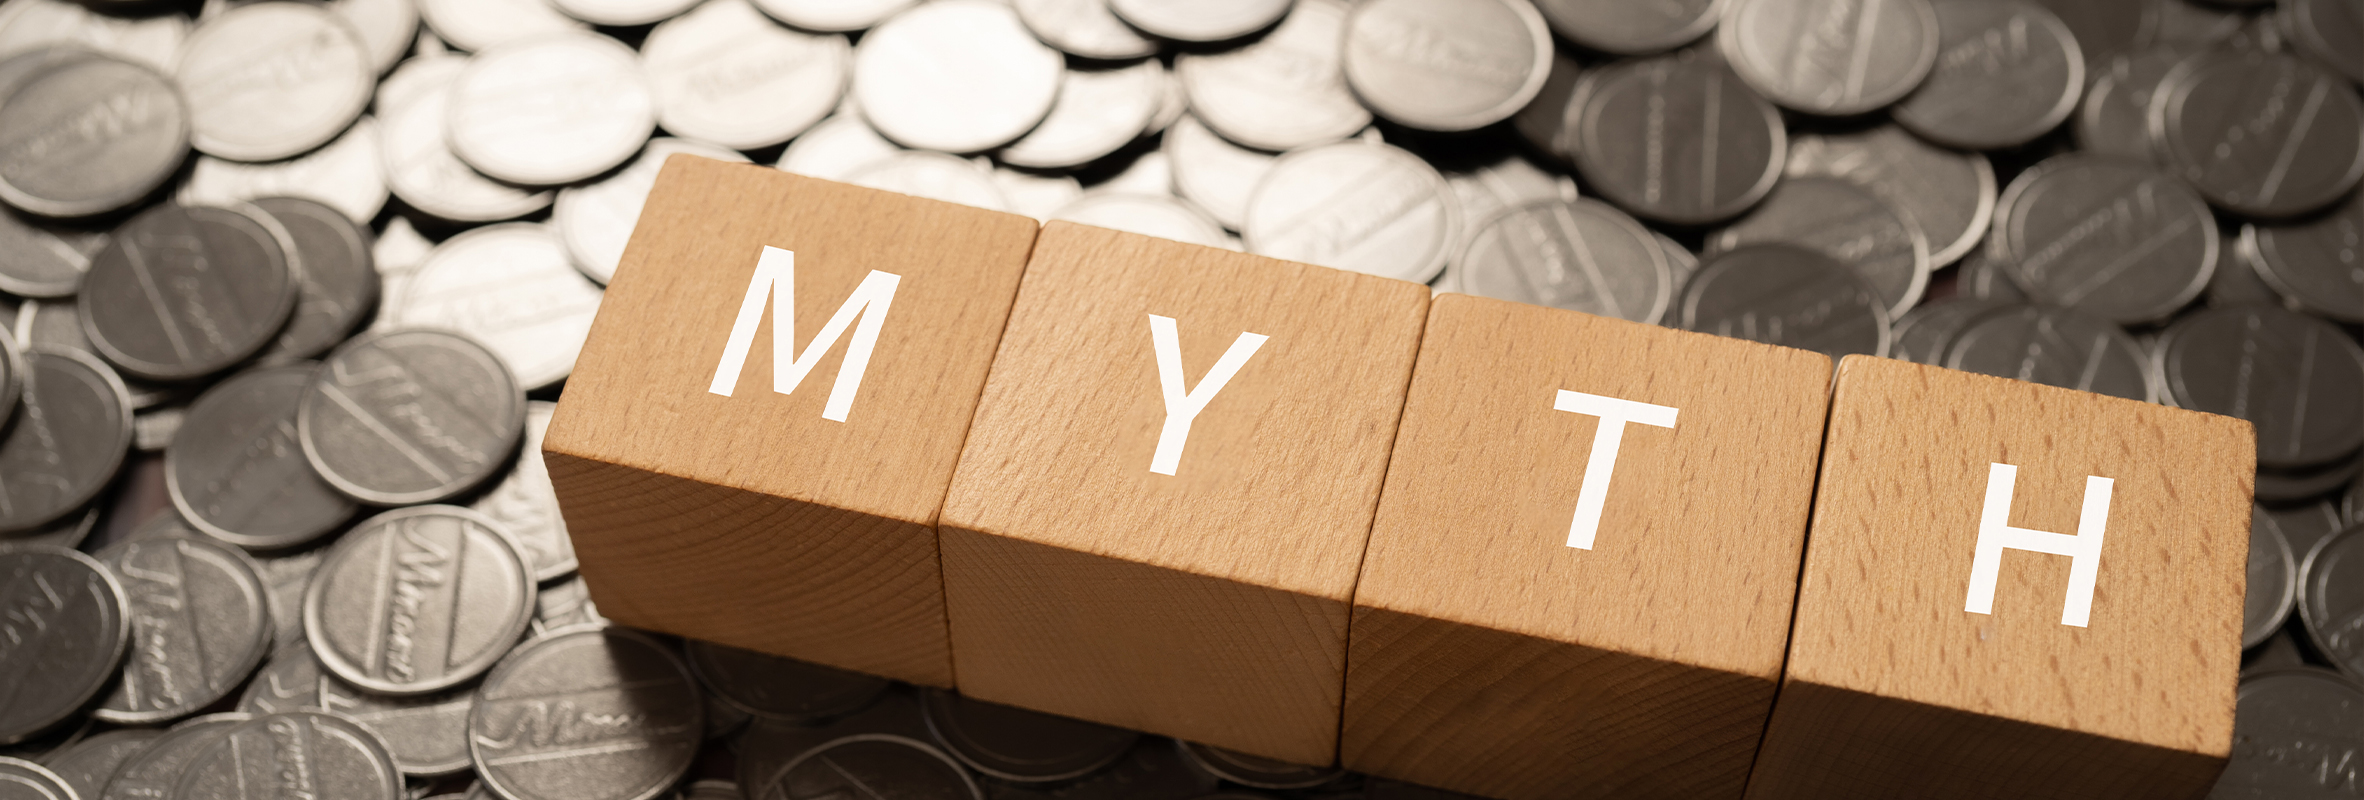 A wooden sign with the word “MYTH” spelled out in four separate blocks stands on a pile of assorted coins.